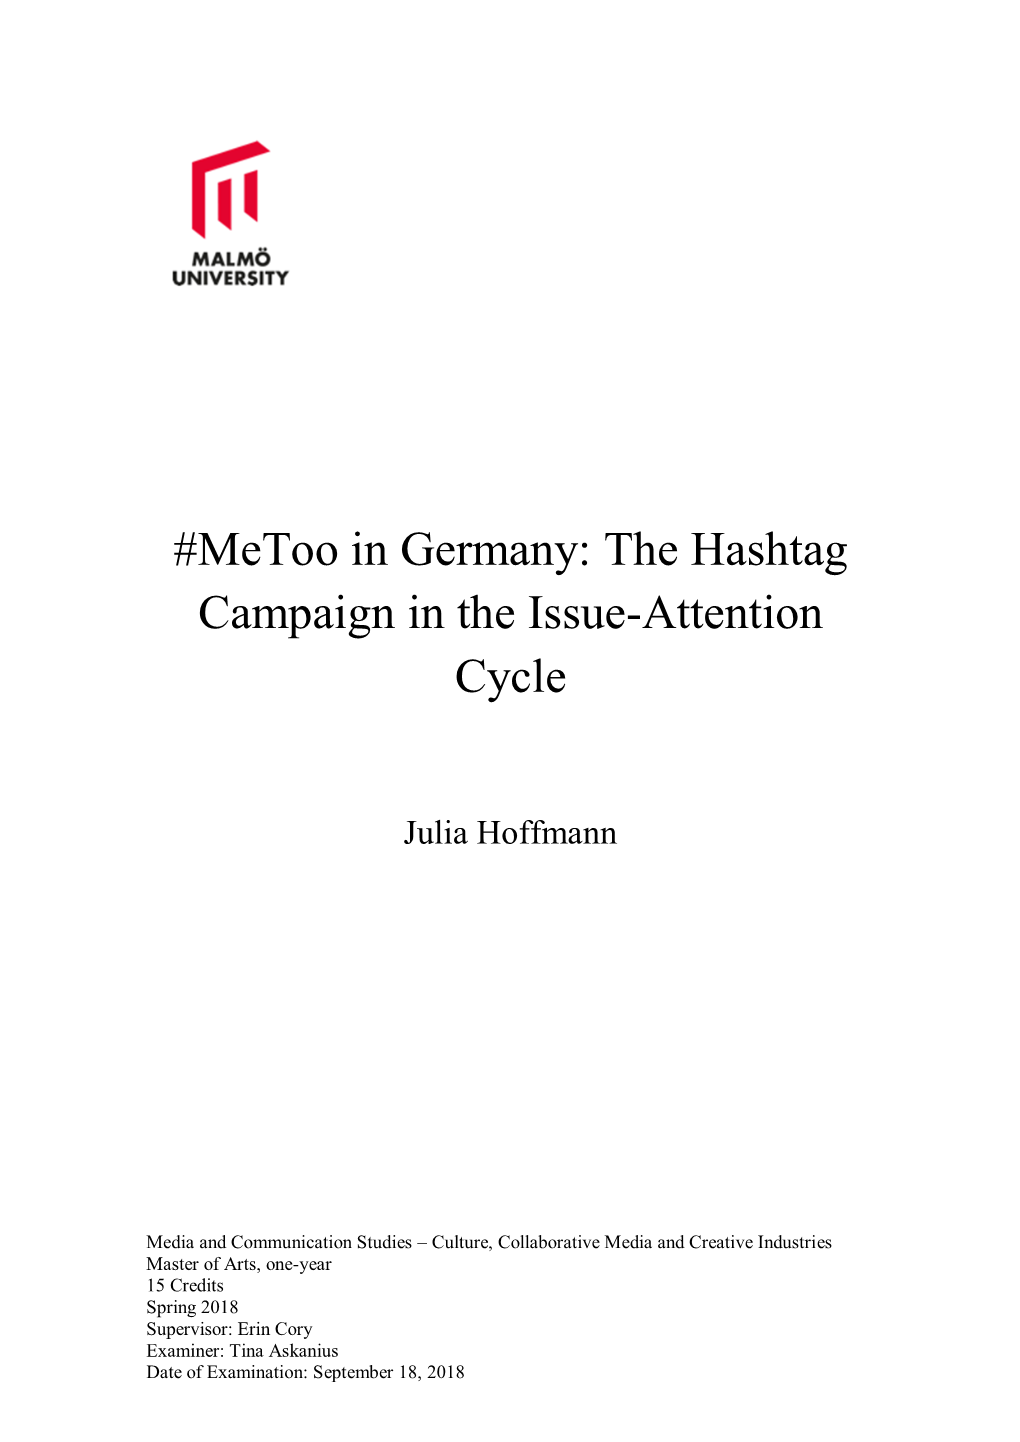 Metoo in Germany: the Hashtag Campaign in the Issue-Attention Cycle